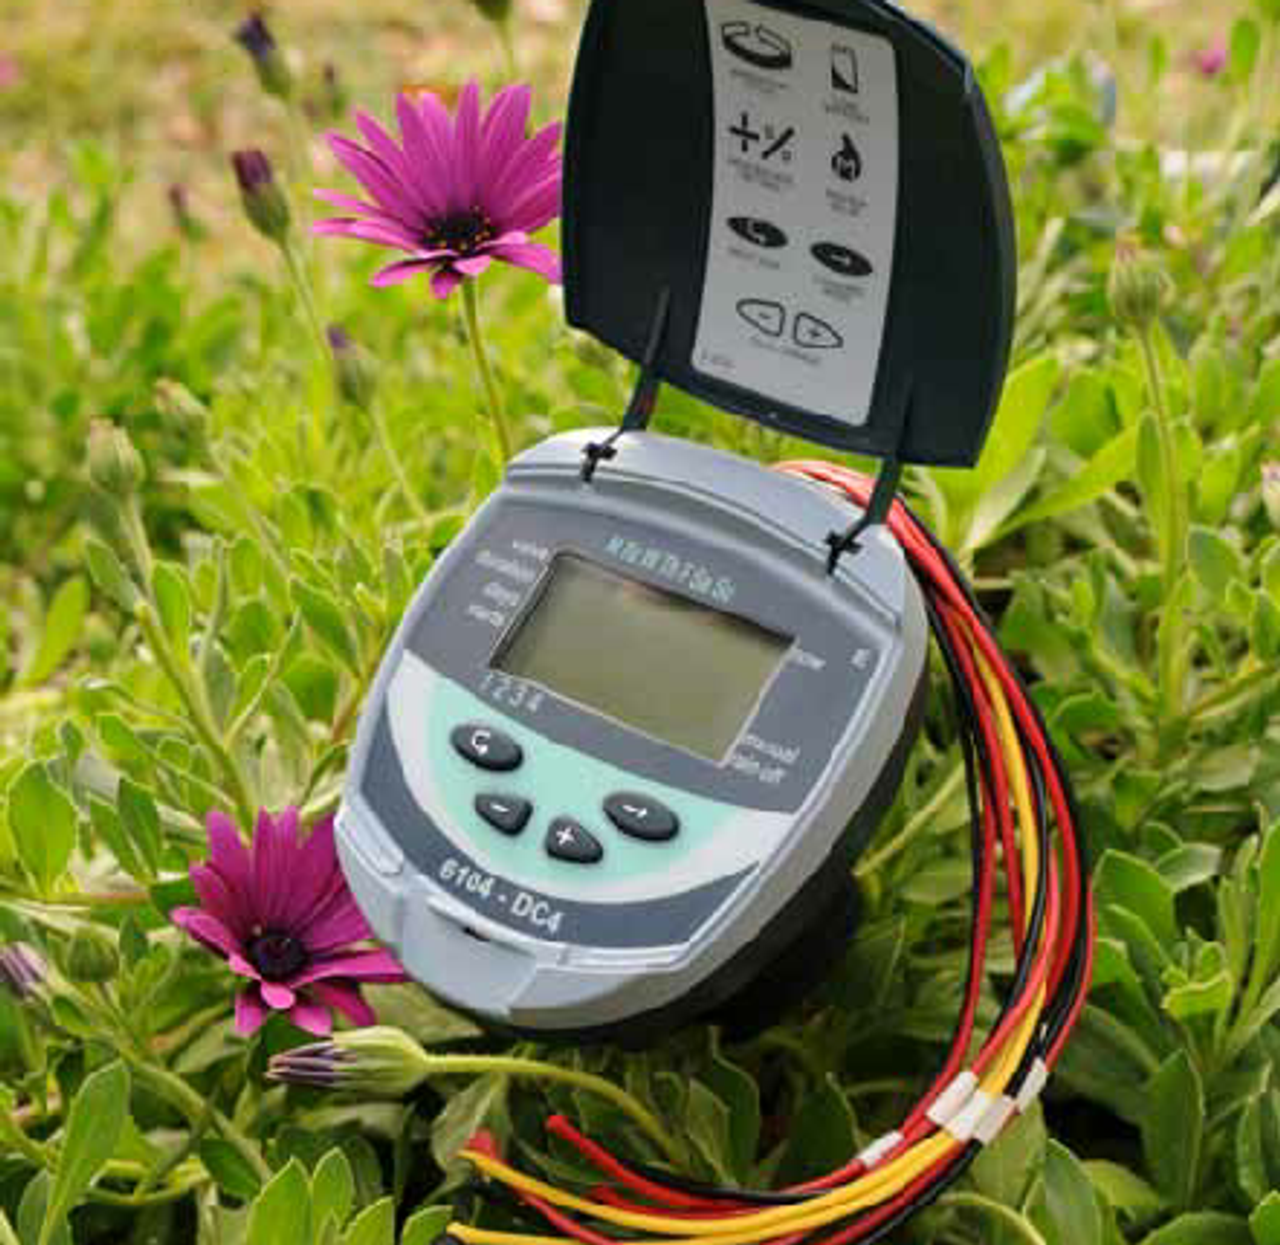 galcon irrigation controller